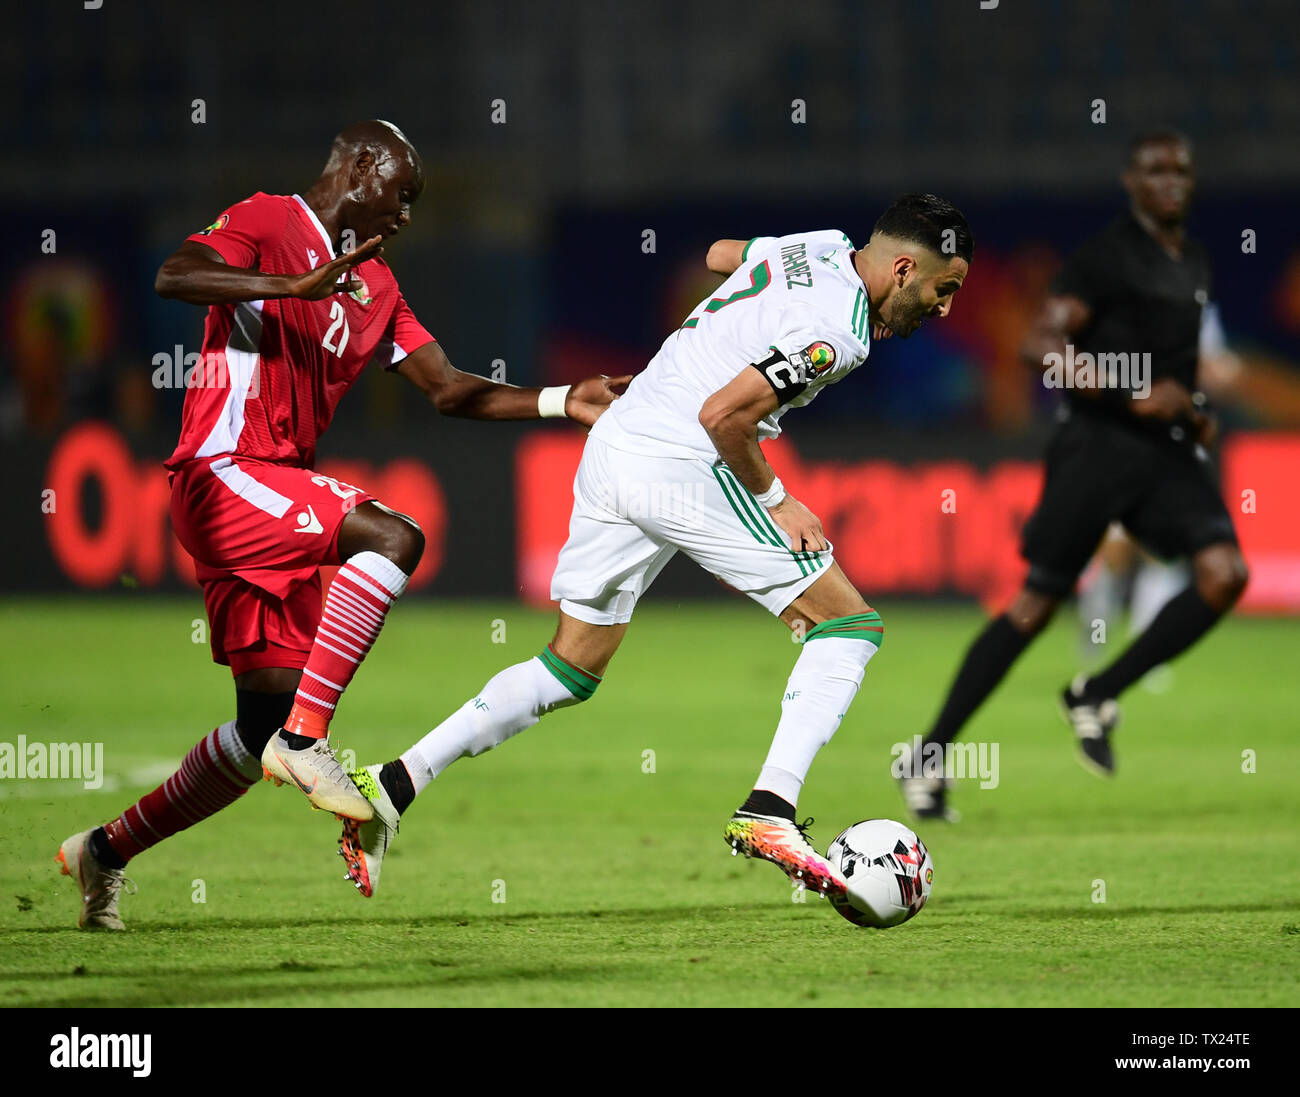 Cairo. 23rd June, 2019. Riyad Mahrez (R) of Algeria vies with Dennis Odhiambo of Kenya during the 2019 African Cup of Nations Group C match between Algeria and Kenya in Cario, Egypt on June 23, 2019. Algeria won 2-0. Credit: Wu Huiwo/Xinhua/Alamy Live News Stock Photo